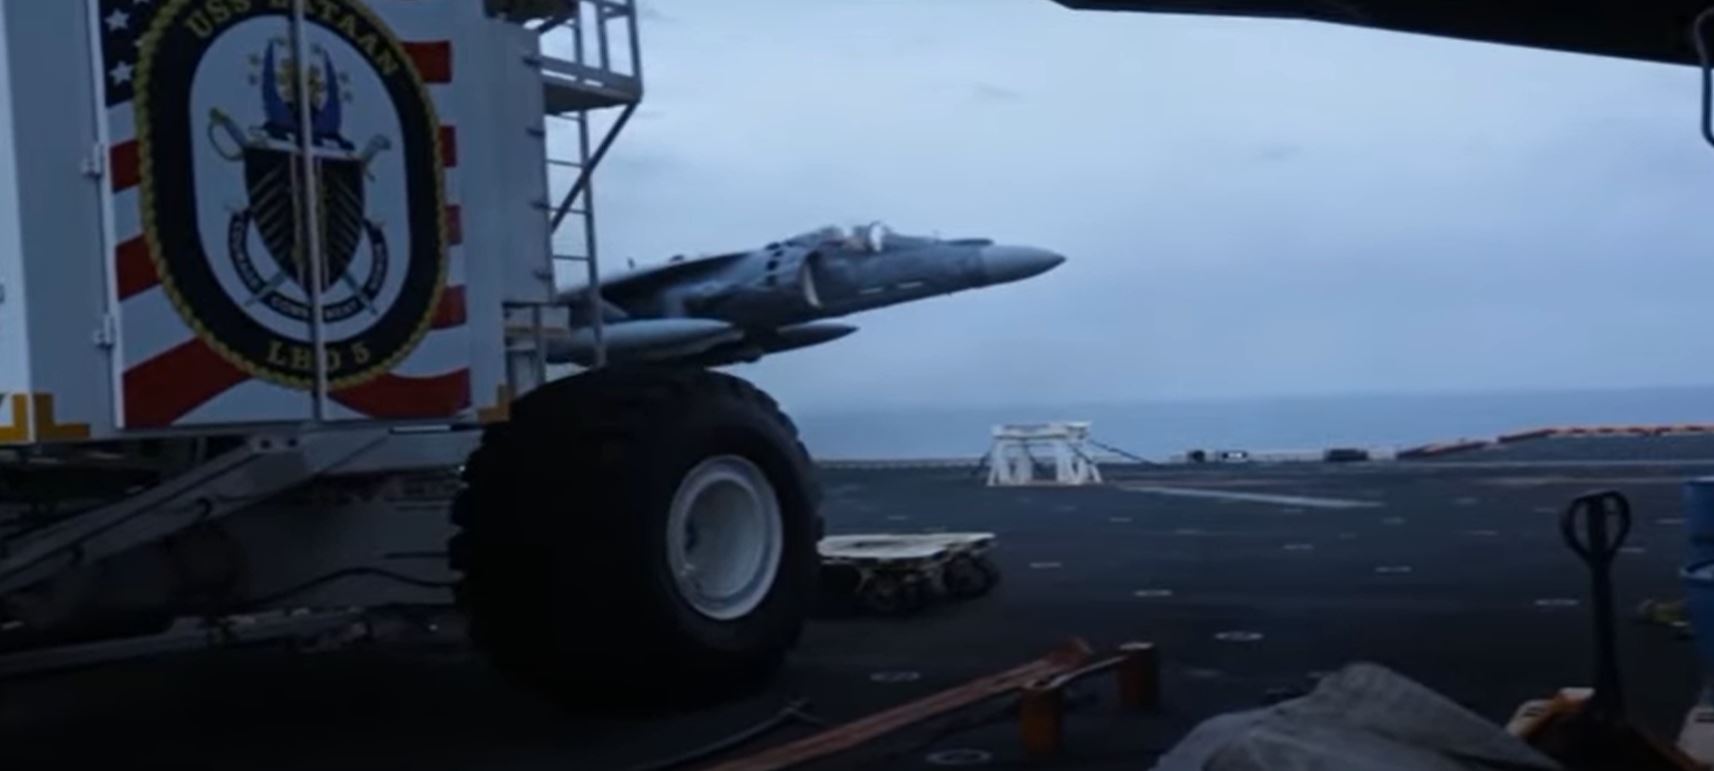 Meet Captain Mahoney, Who Landed A Harrier Precisely On A Stool 4